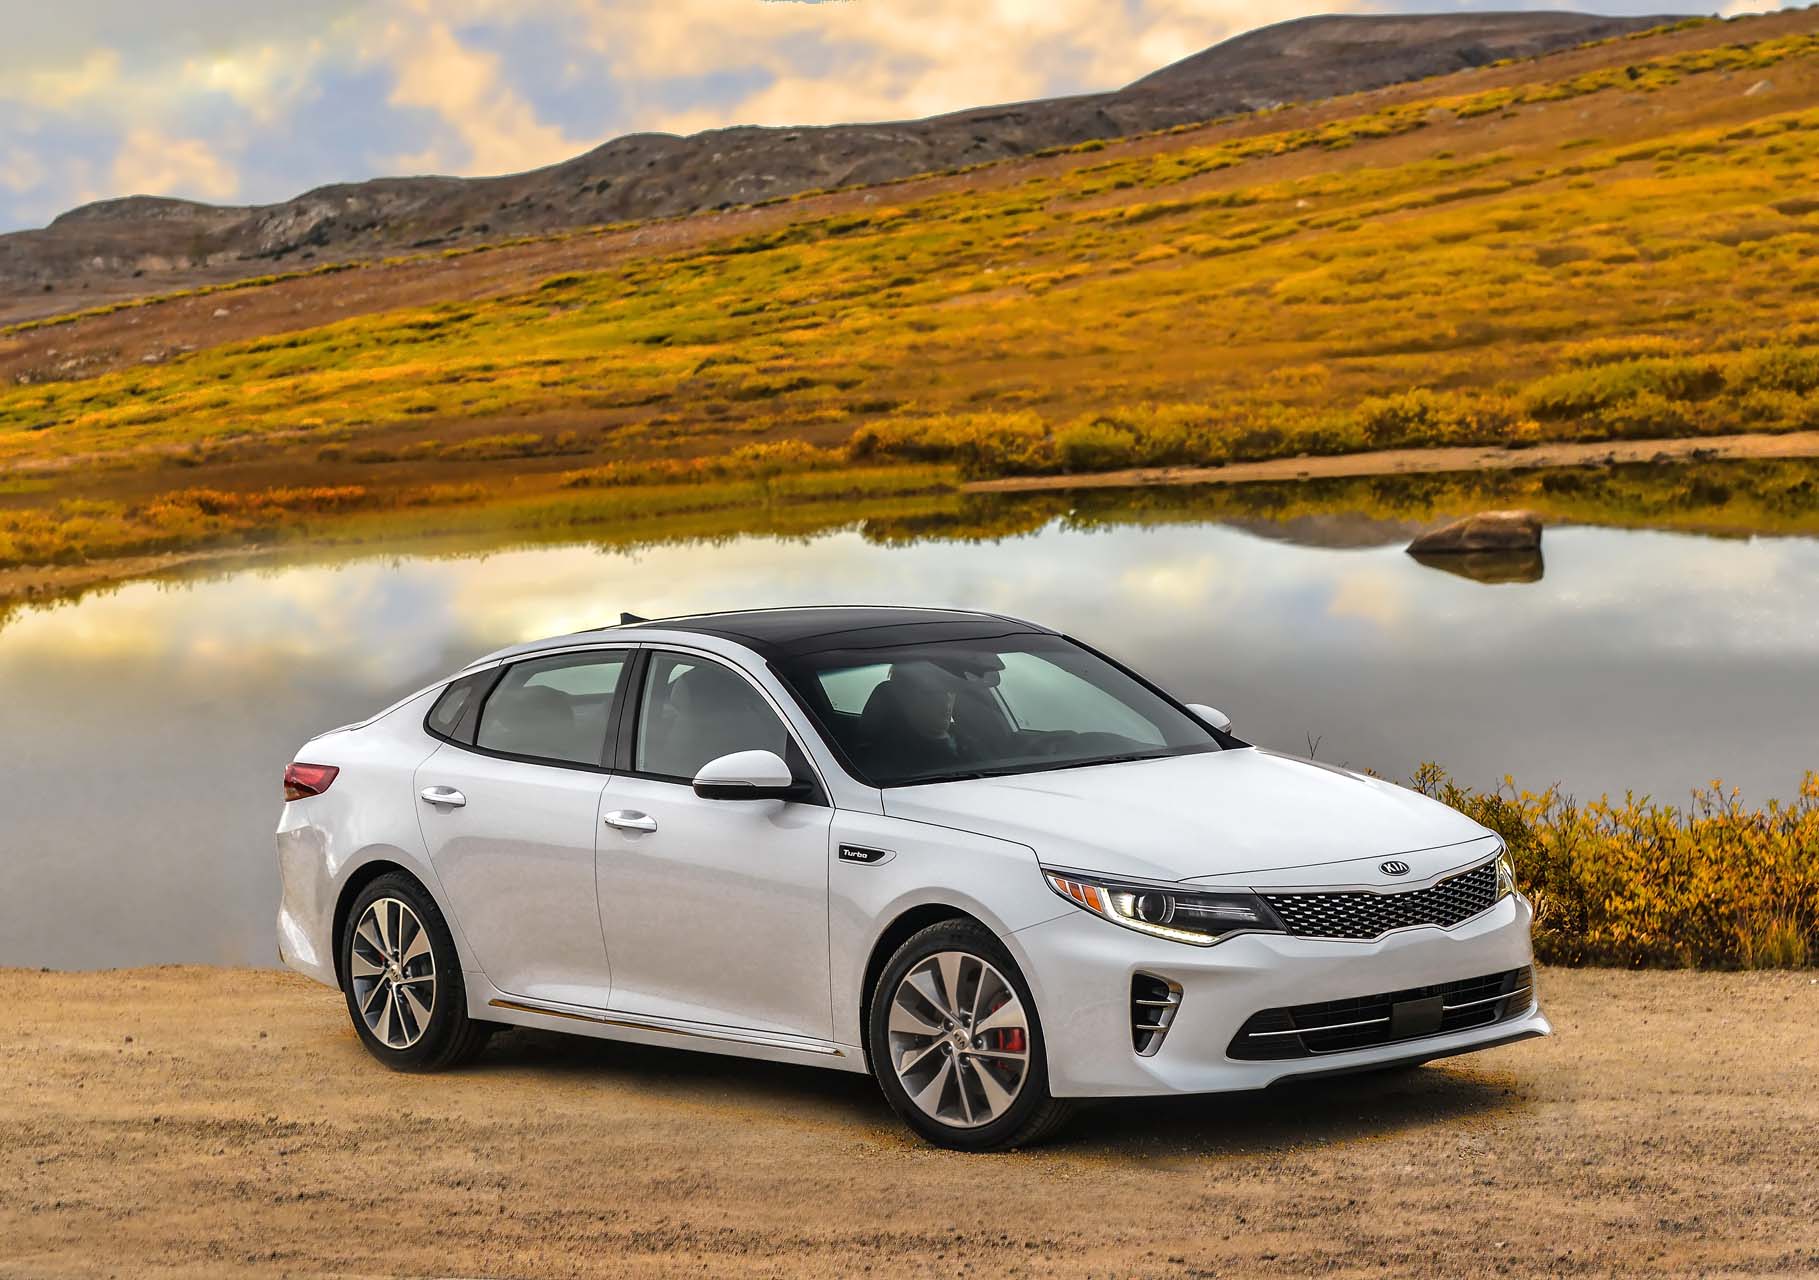 2018 Kia Optima Review, Ratings, Specs, Prices, and Photos - The Car